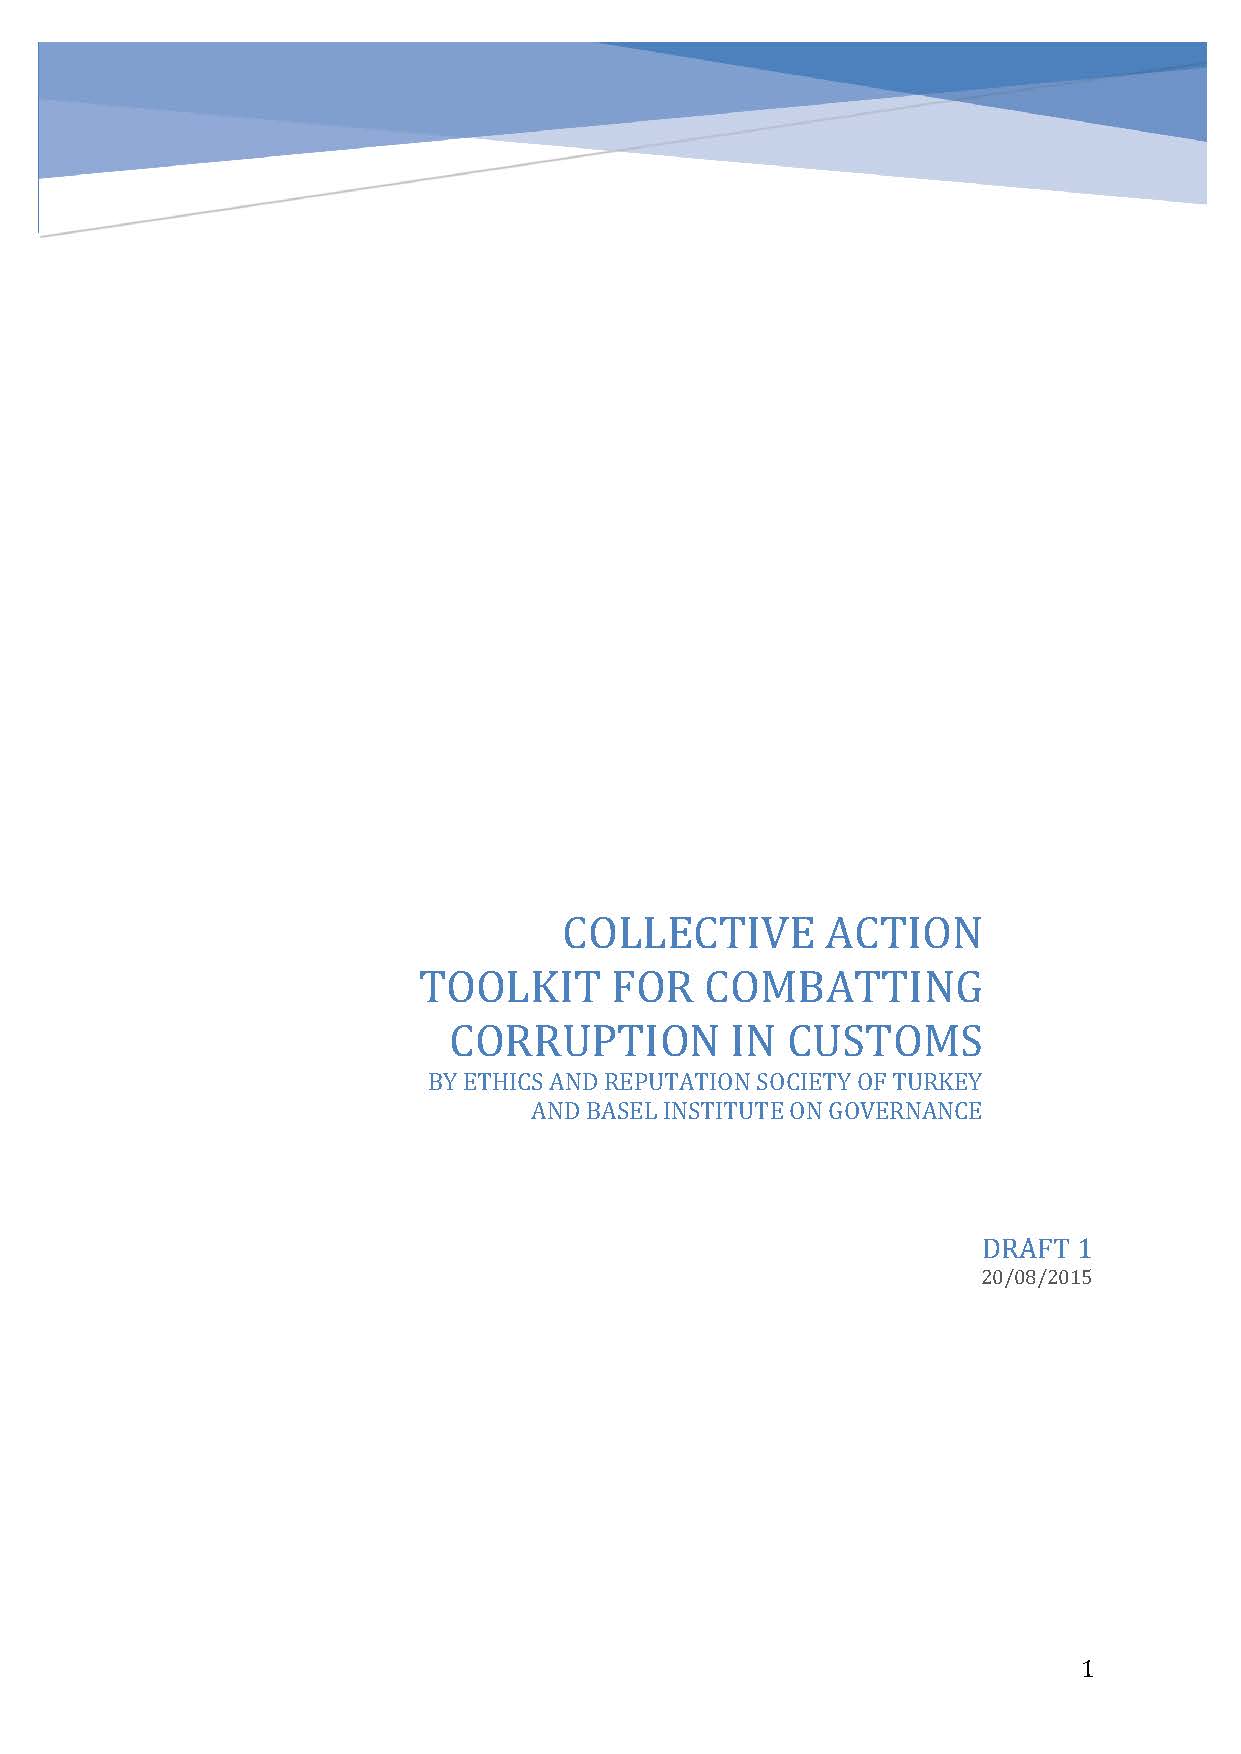 Pages from Collective Action Toolkit For Combating Corruption in Customs.jpg